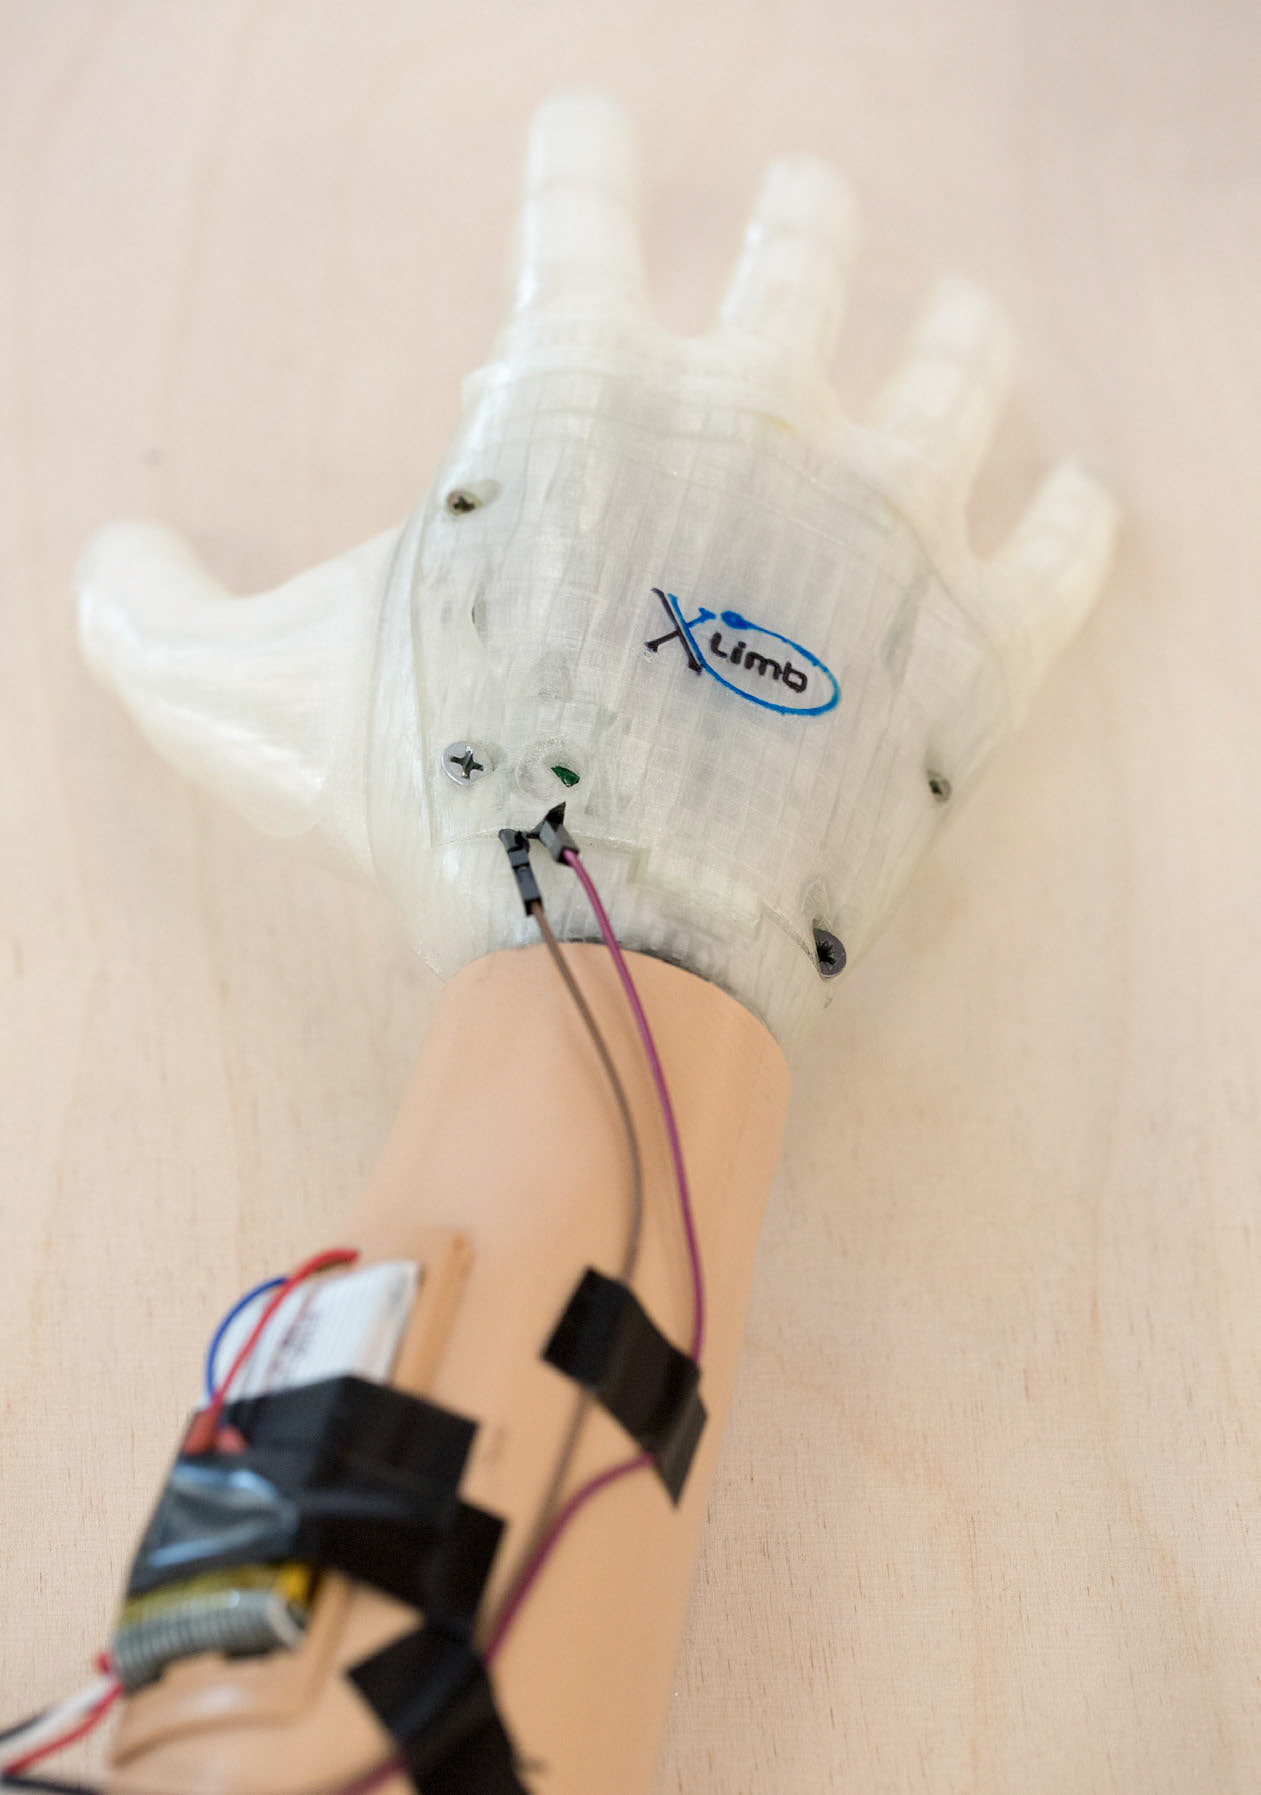 3D Printed Soft Robotic Prosthetic Hand